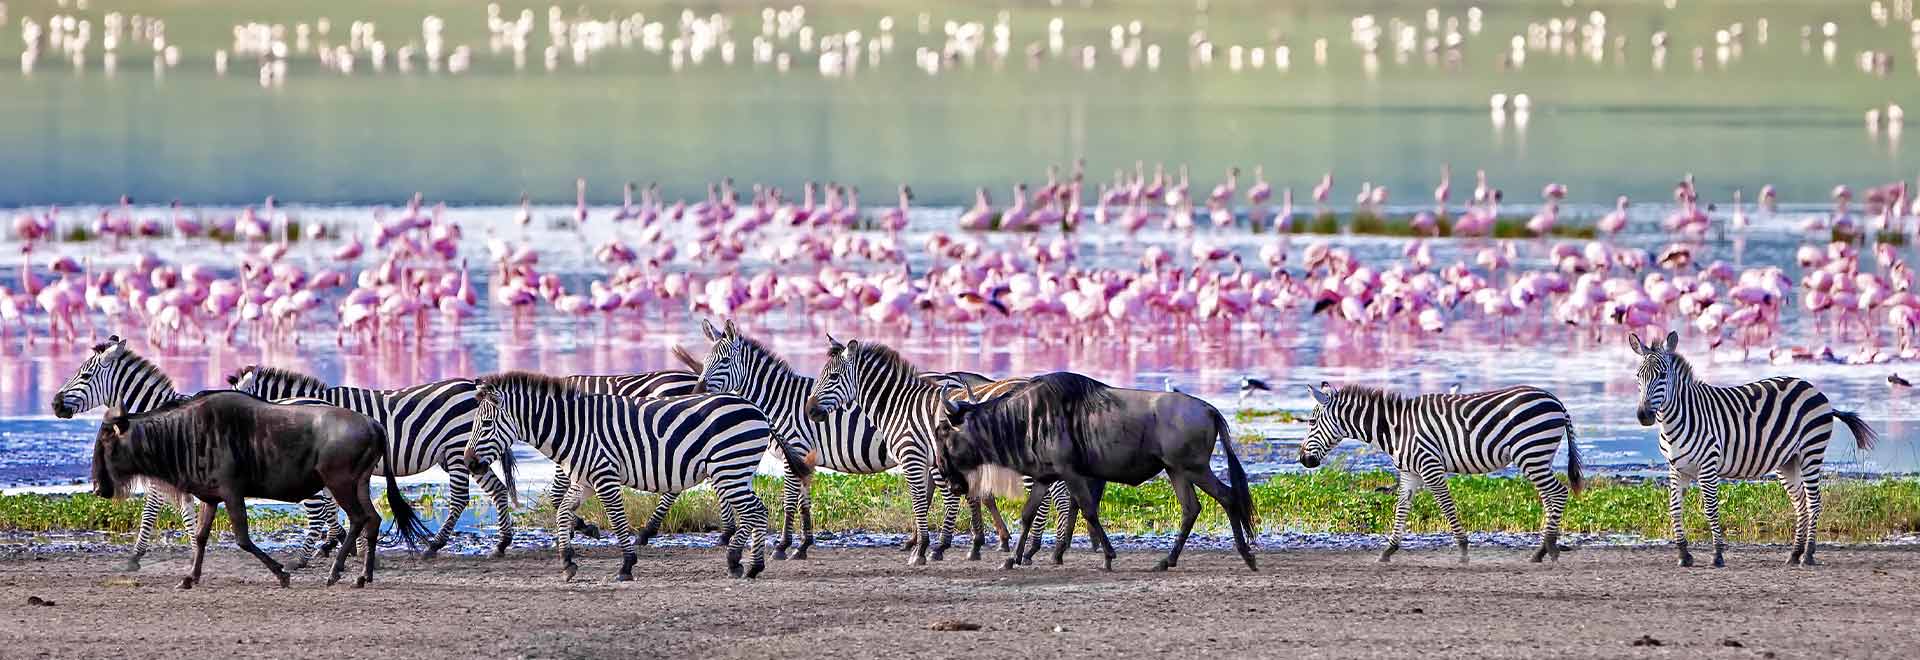 AK Legal Restrictions Terms Use Ngorongoro Crater m